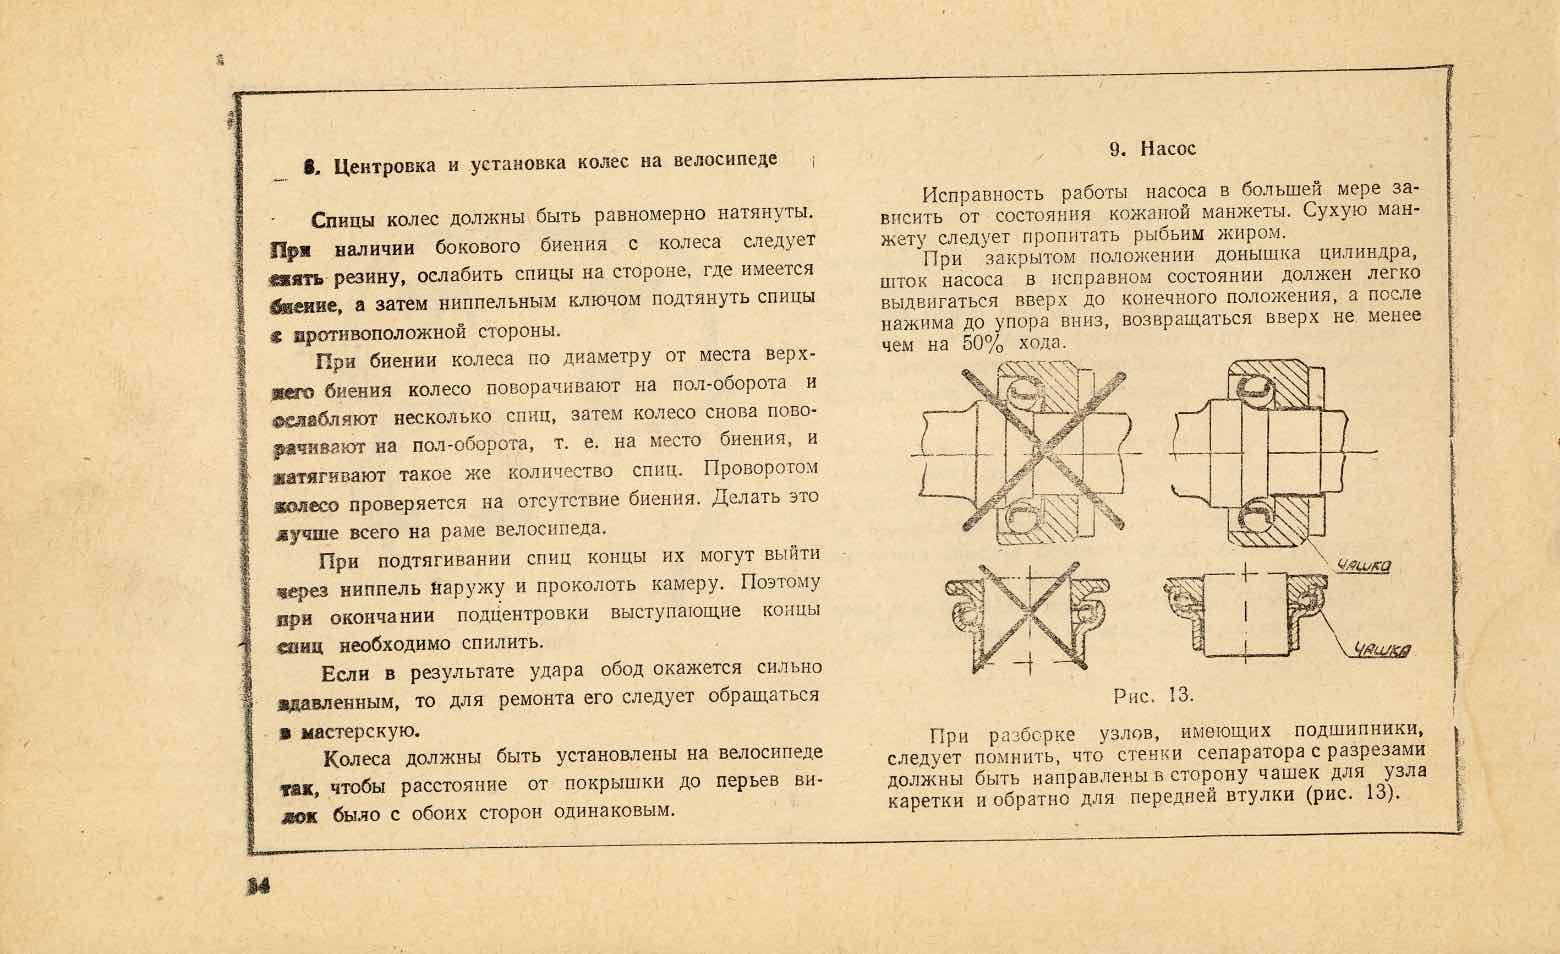 Kharkov - instructions for B33 - page 14 main image